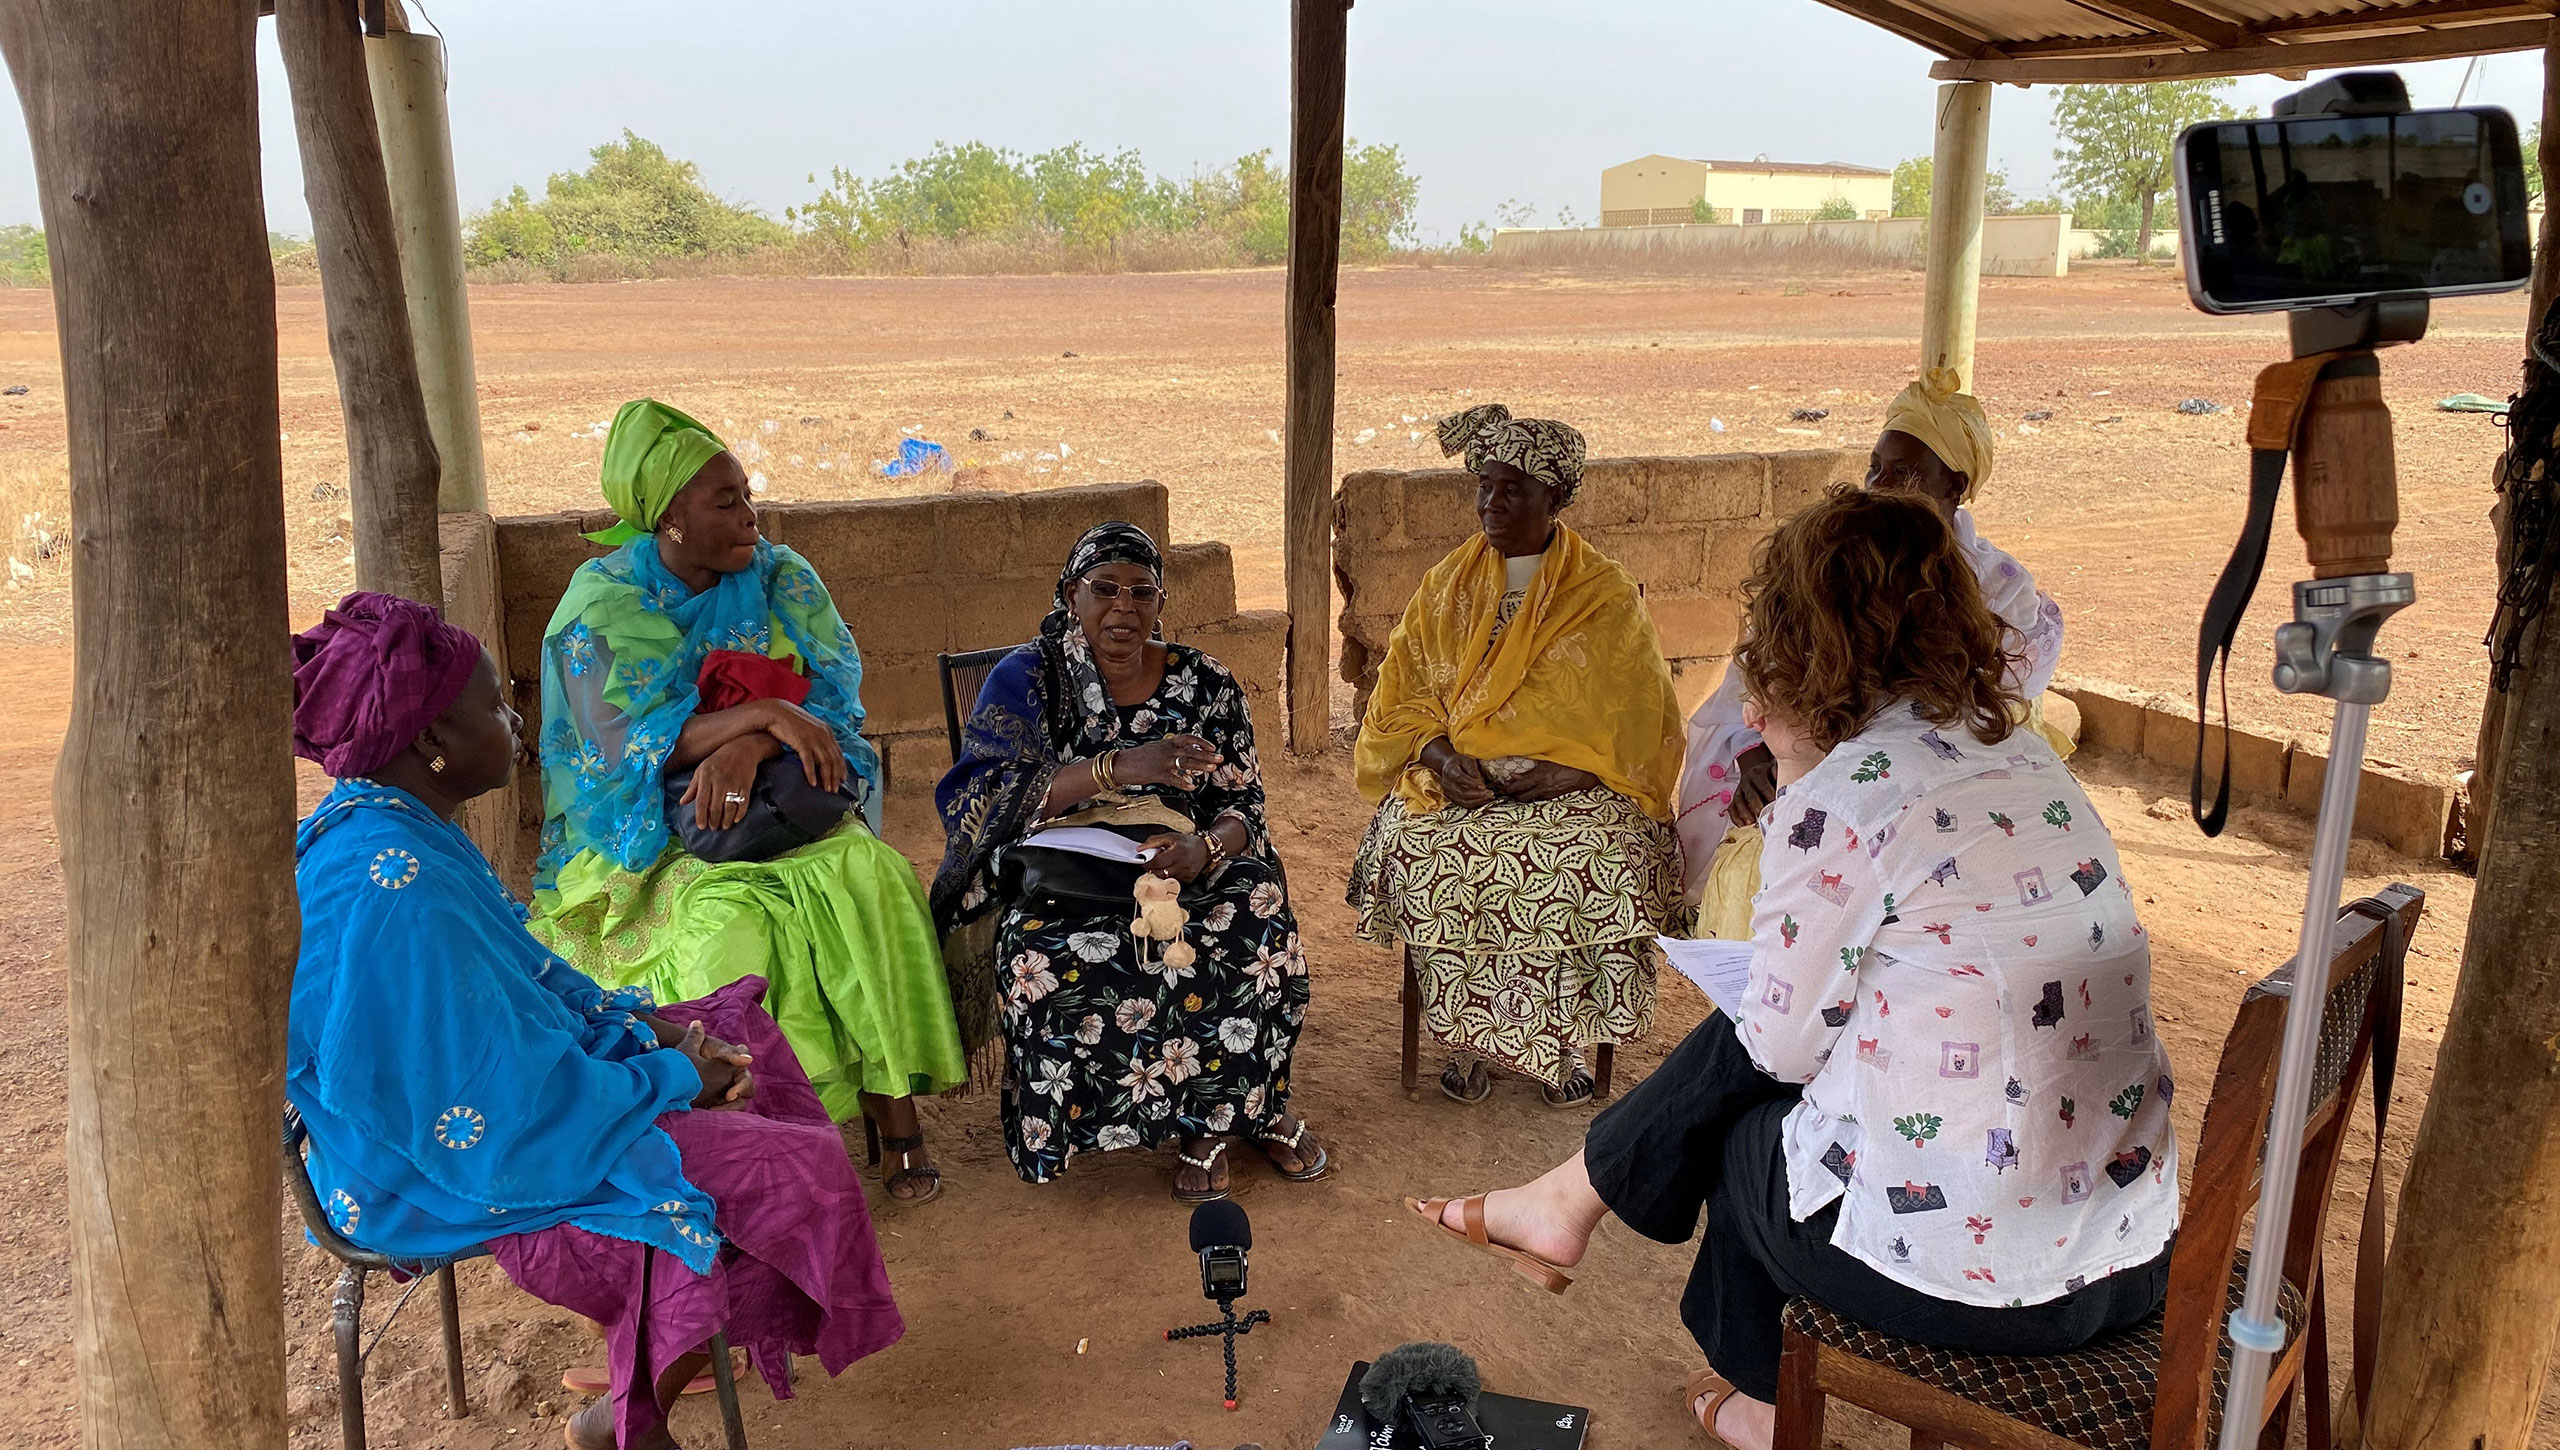 A discussion (focus) group in Niger with women listeners of Studio Kalangou, led by Dr. Emma Heywood of Sheffield University. © Sacha Meuter / Fondation Hirondelle.